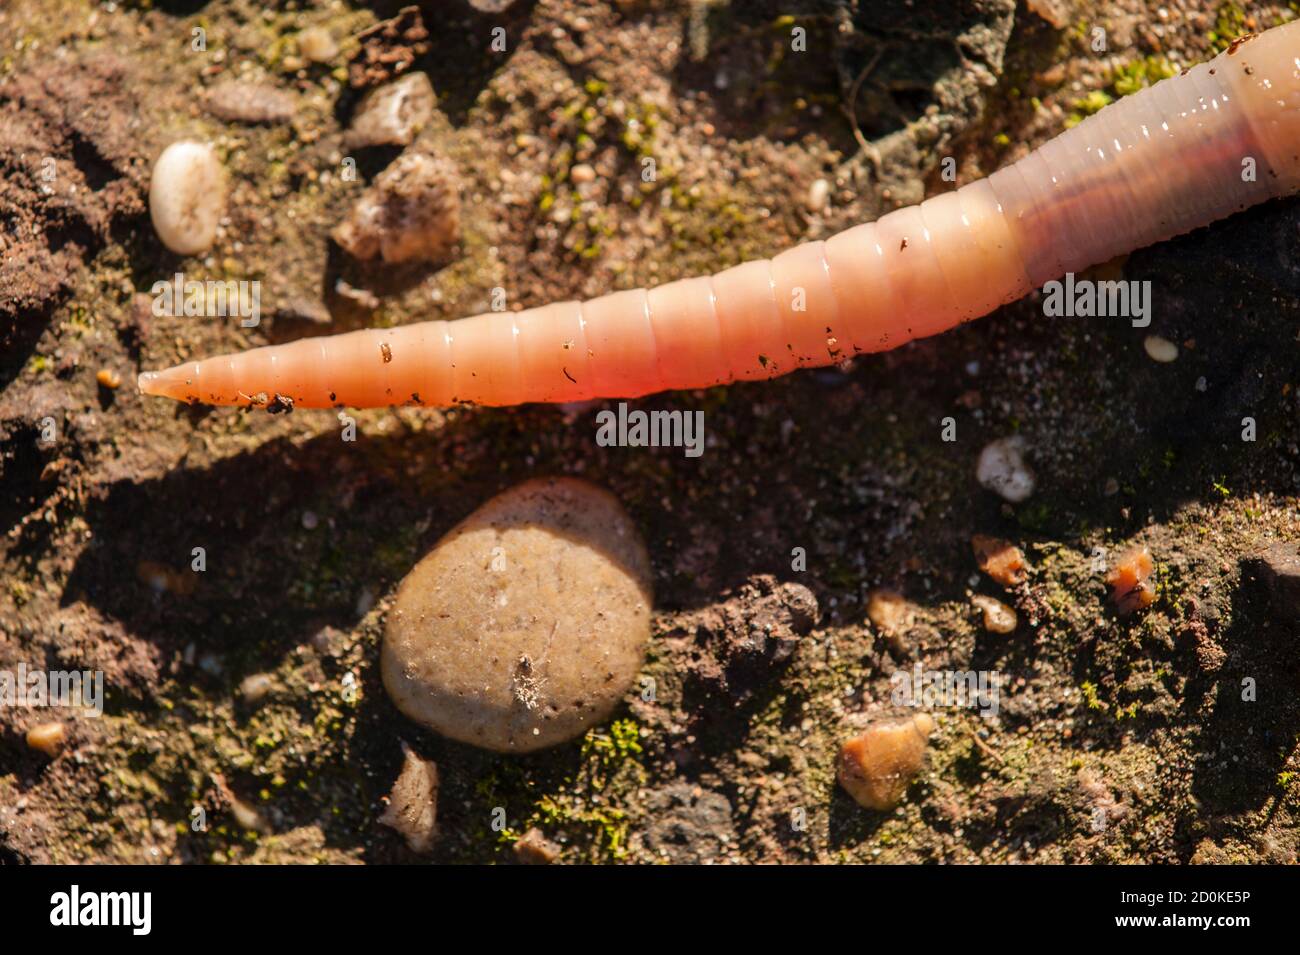 Earthworm, lombricus terrestris, also know as lob worm